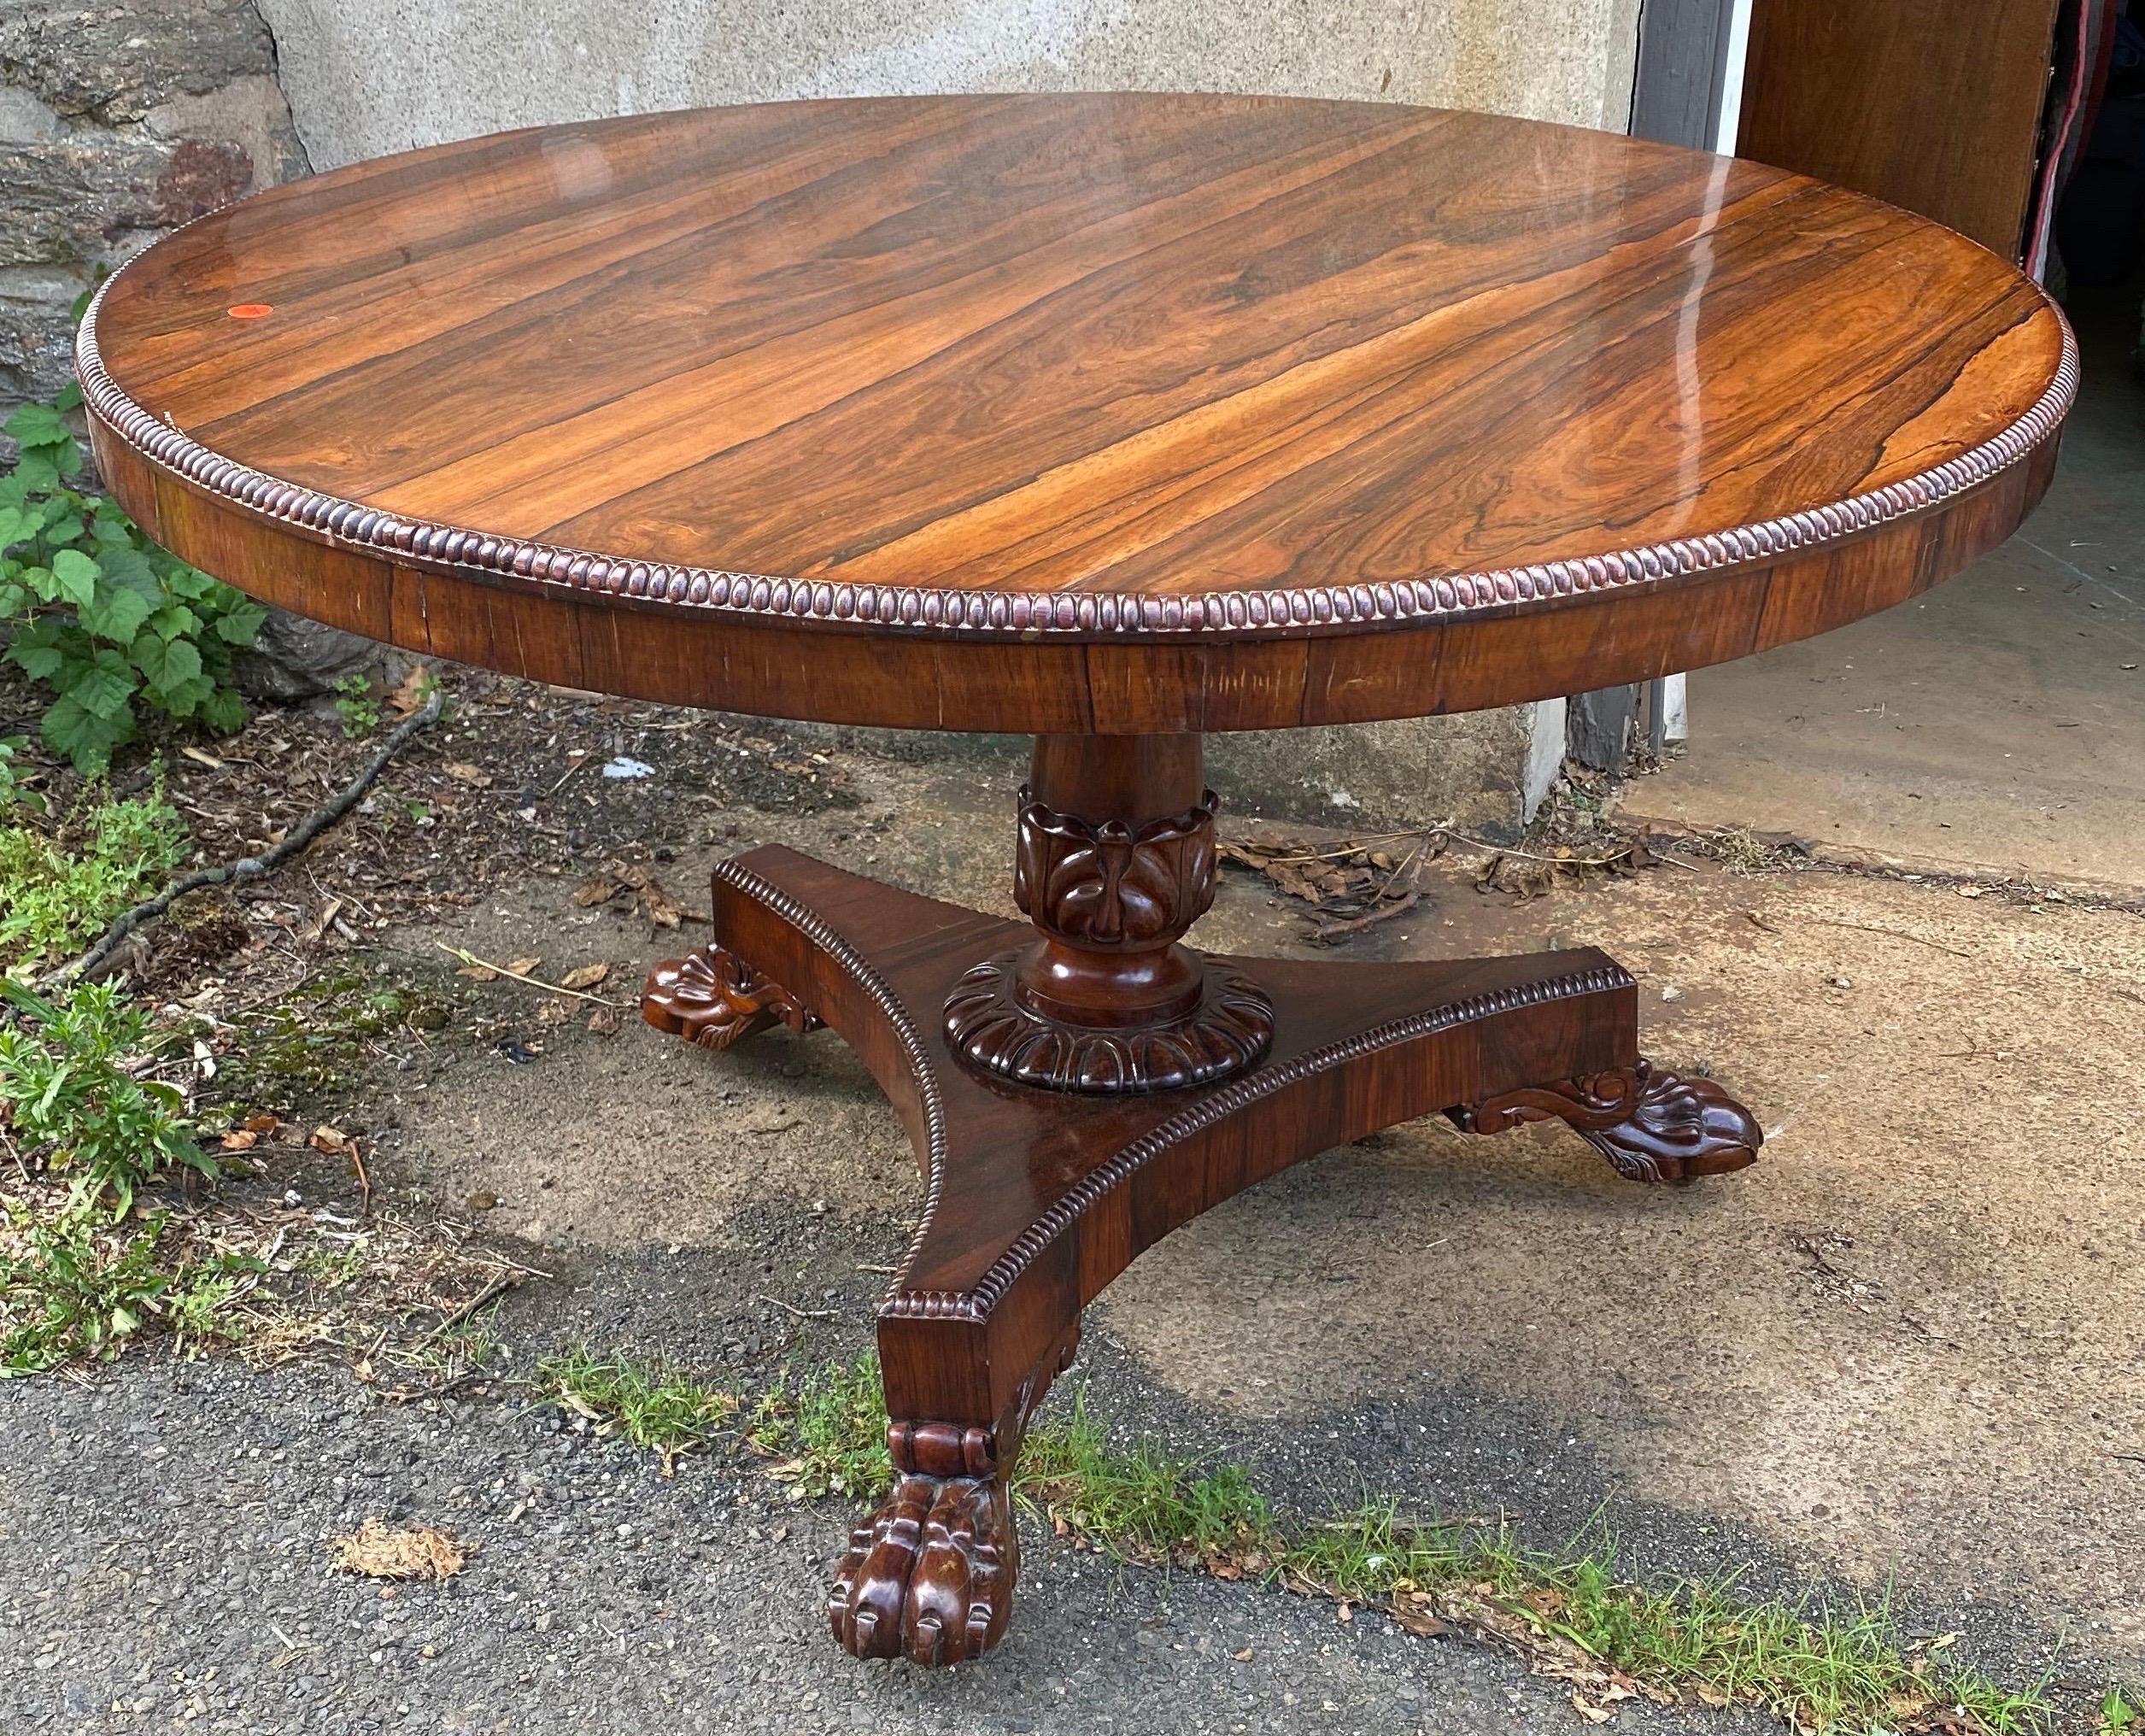 19th century English Regency rosewood center table. Excellent color and patina on this 49.5